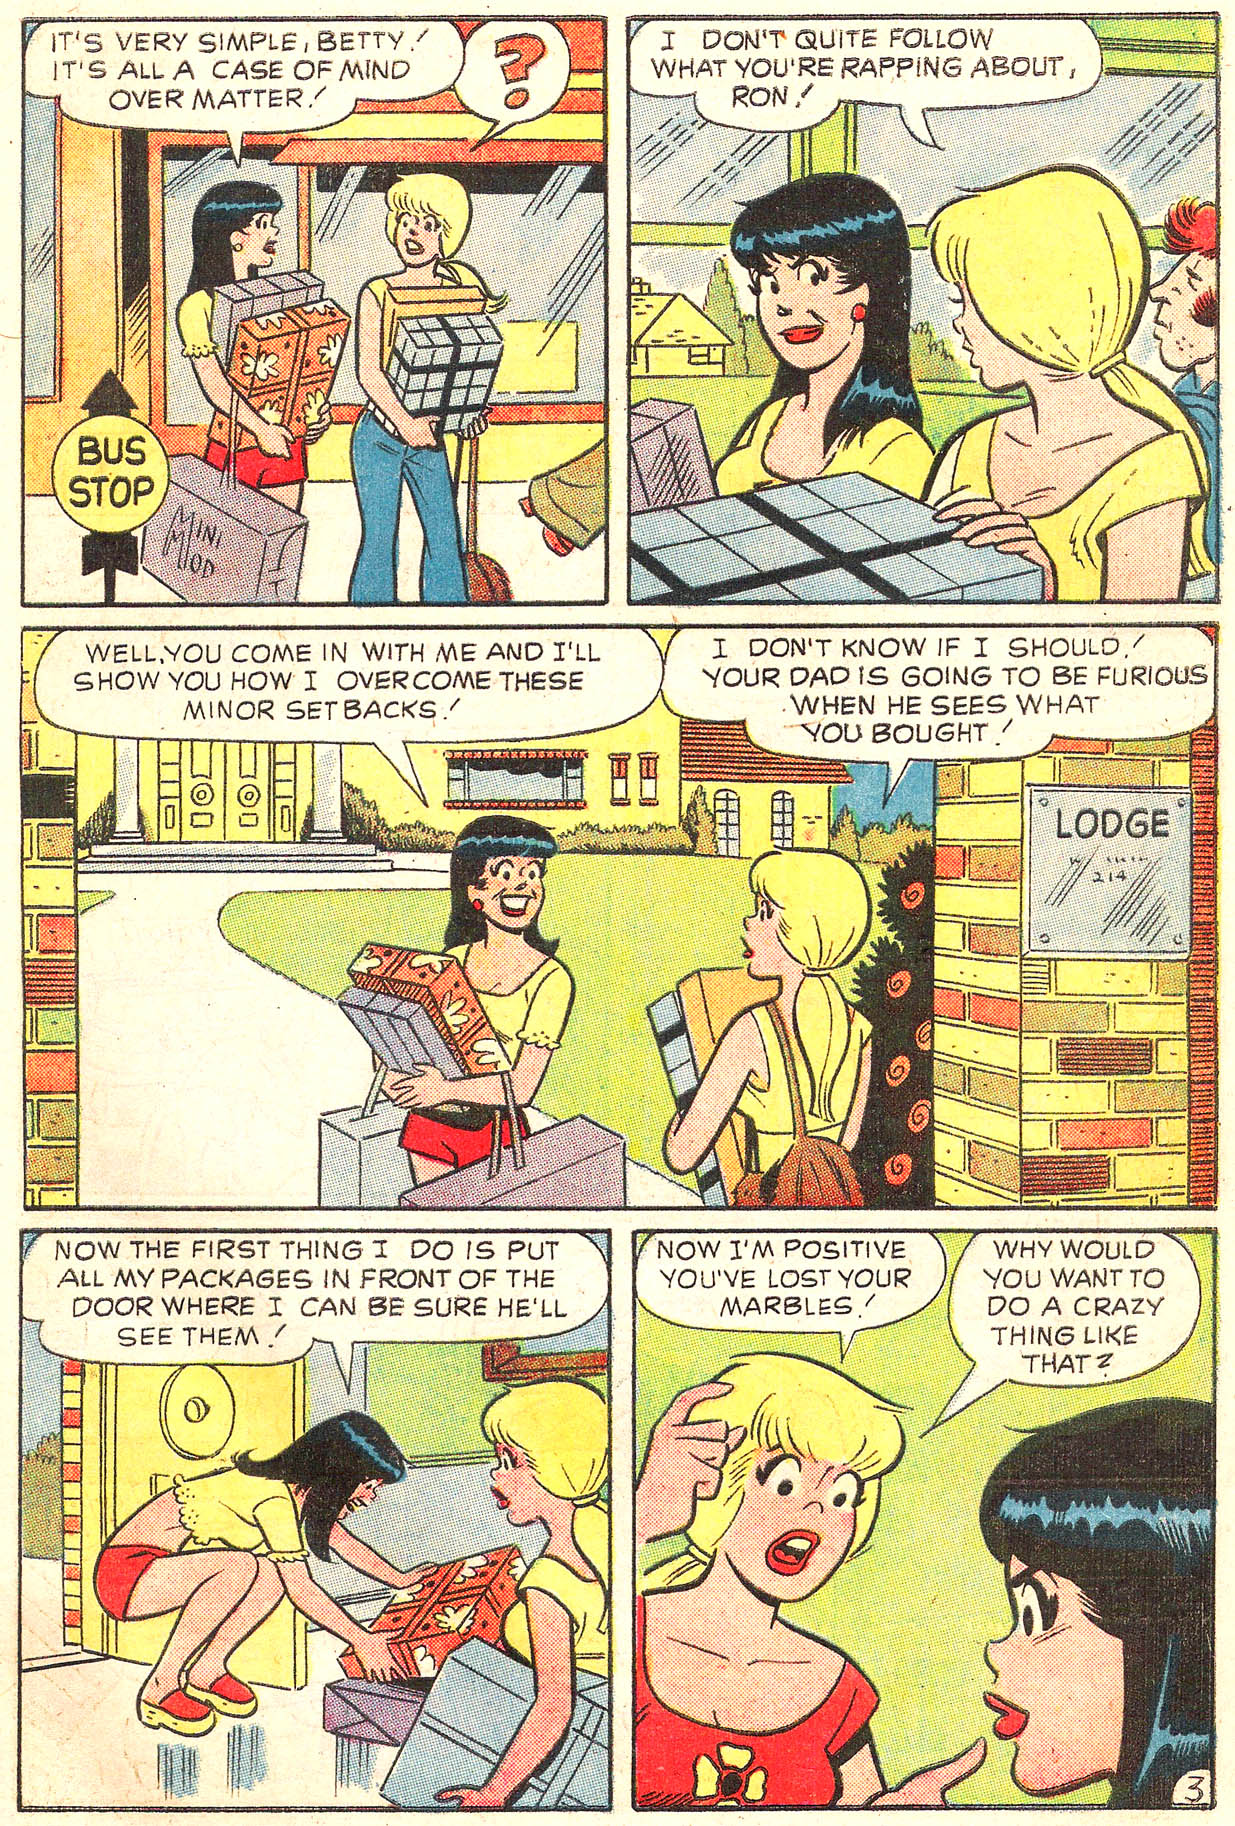 Read online Archie's Girls Betty and Veronica comic -  Issue #217 - 31